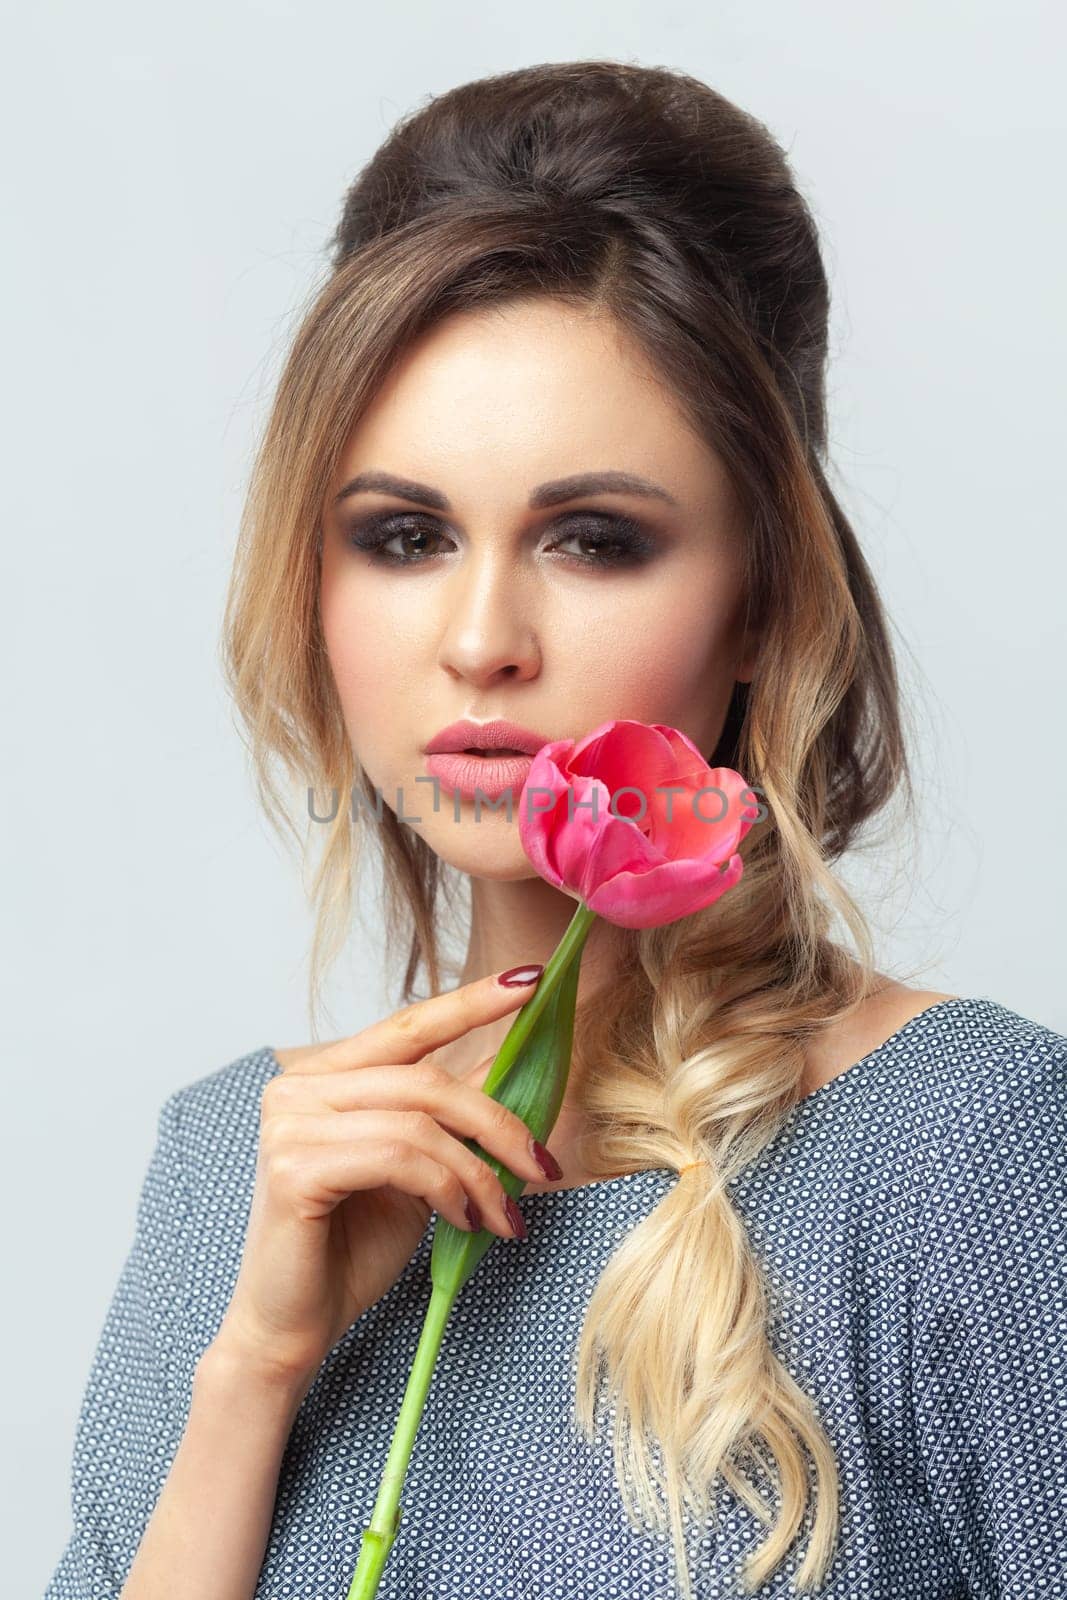 Closeup portrait of attractive gentle blonde woman fashion model with makeup and hairstyle, holding tulip near her face, wearing grey elegant dress. Indoor studio shot isolated on gray background.